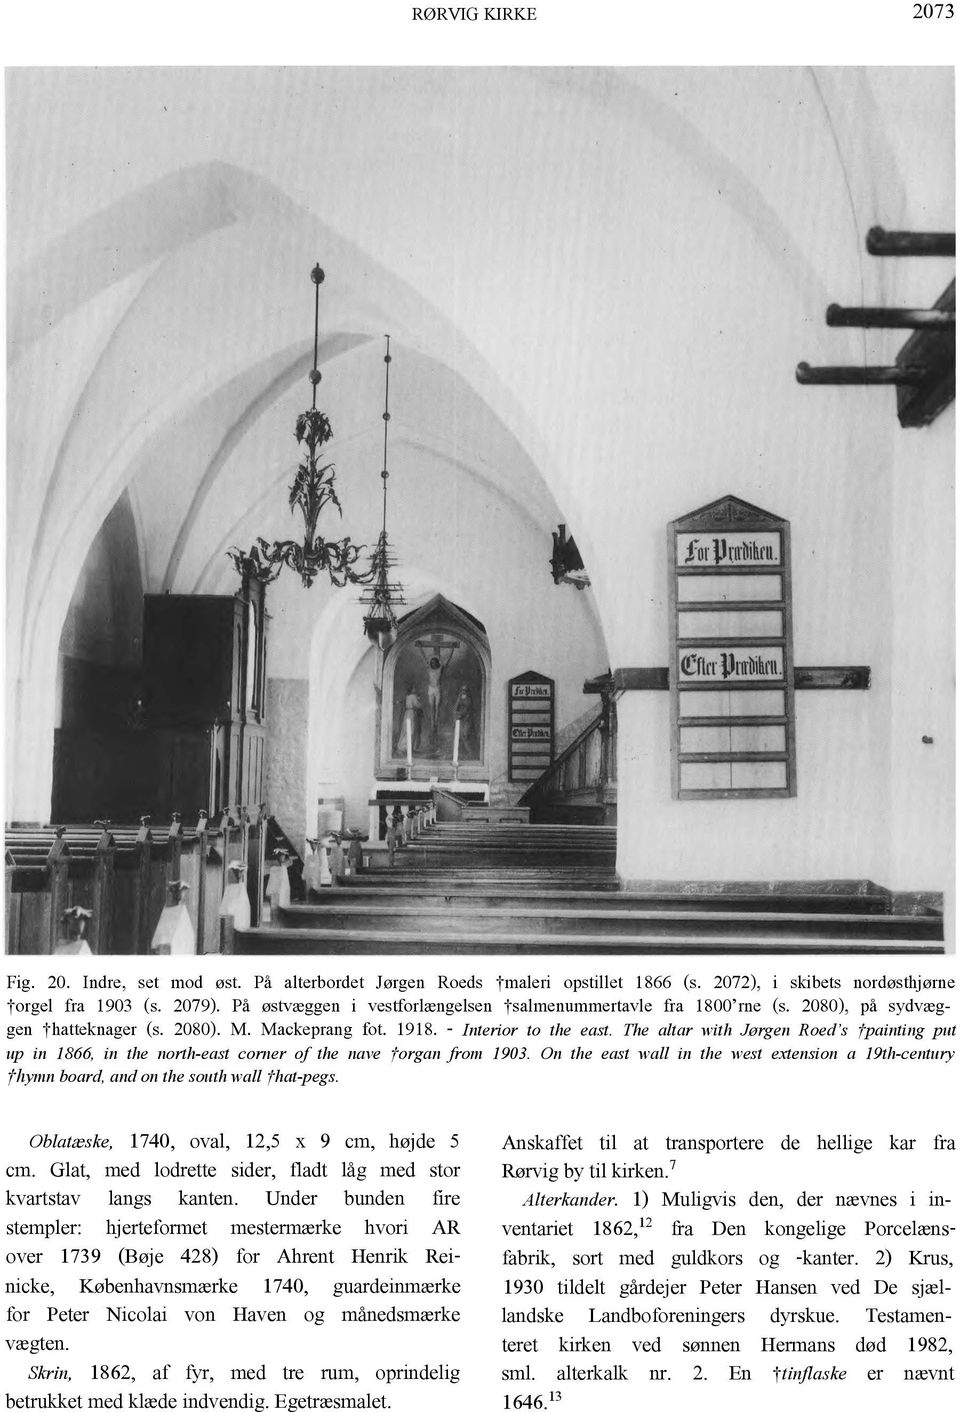 The altar with Jørgen Roed s painting put up in 1866, in the north-east corner of the nave organ from 1903.